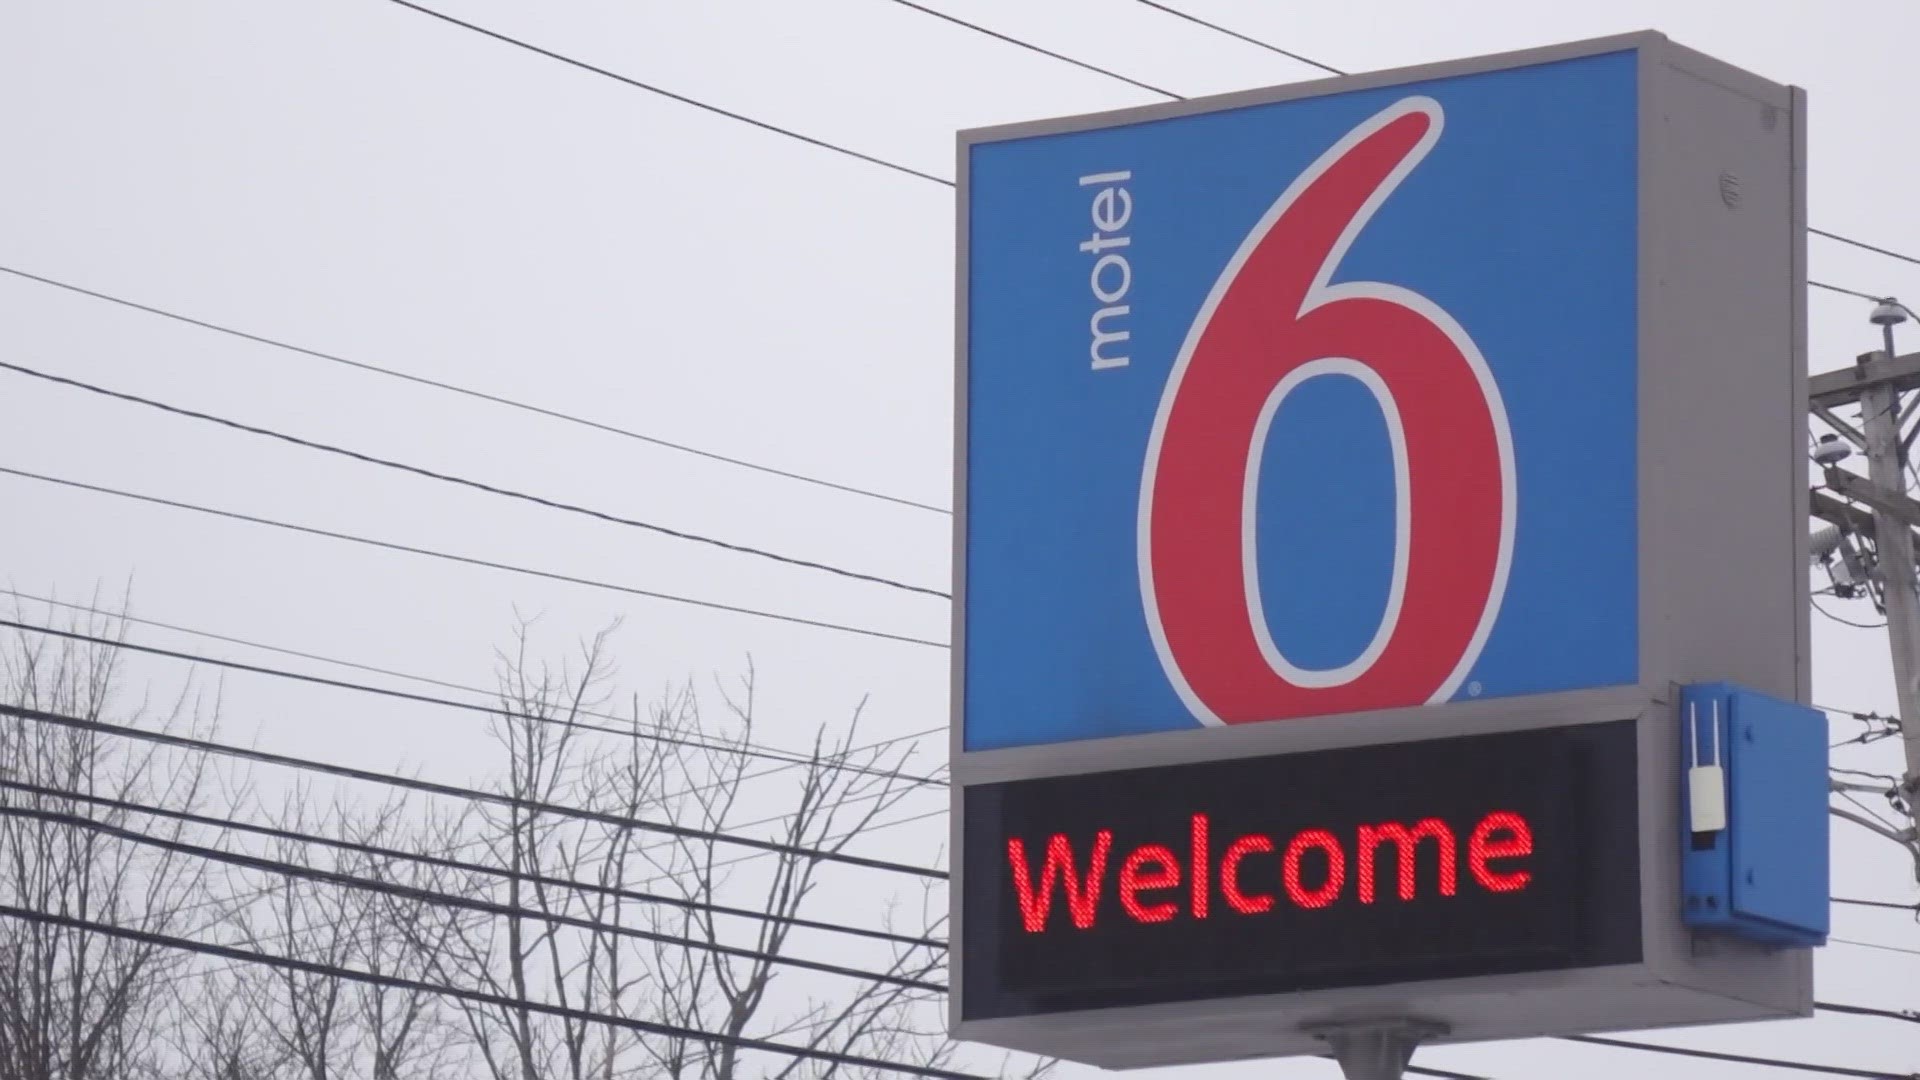 The city has used the Motel 6 as shelter for asylum seekers and people experiencing homelessness, but the nightly rate recently spiked.